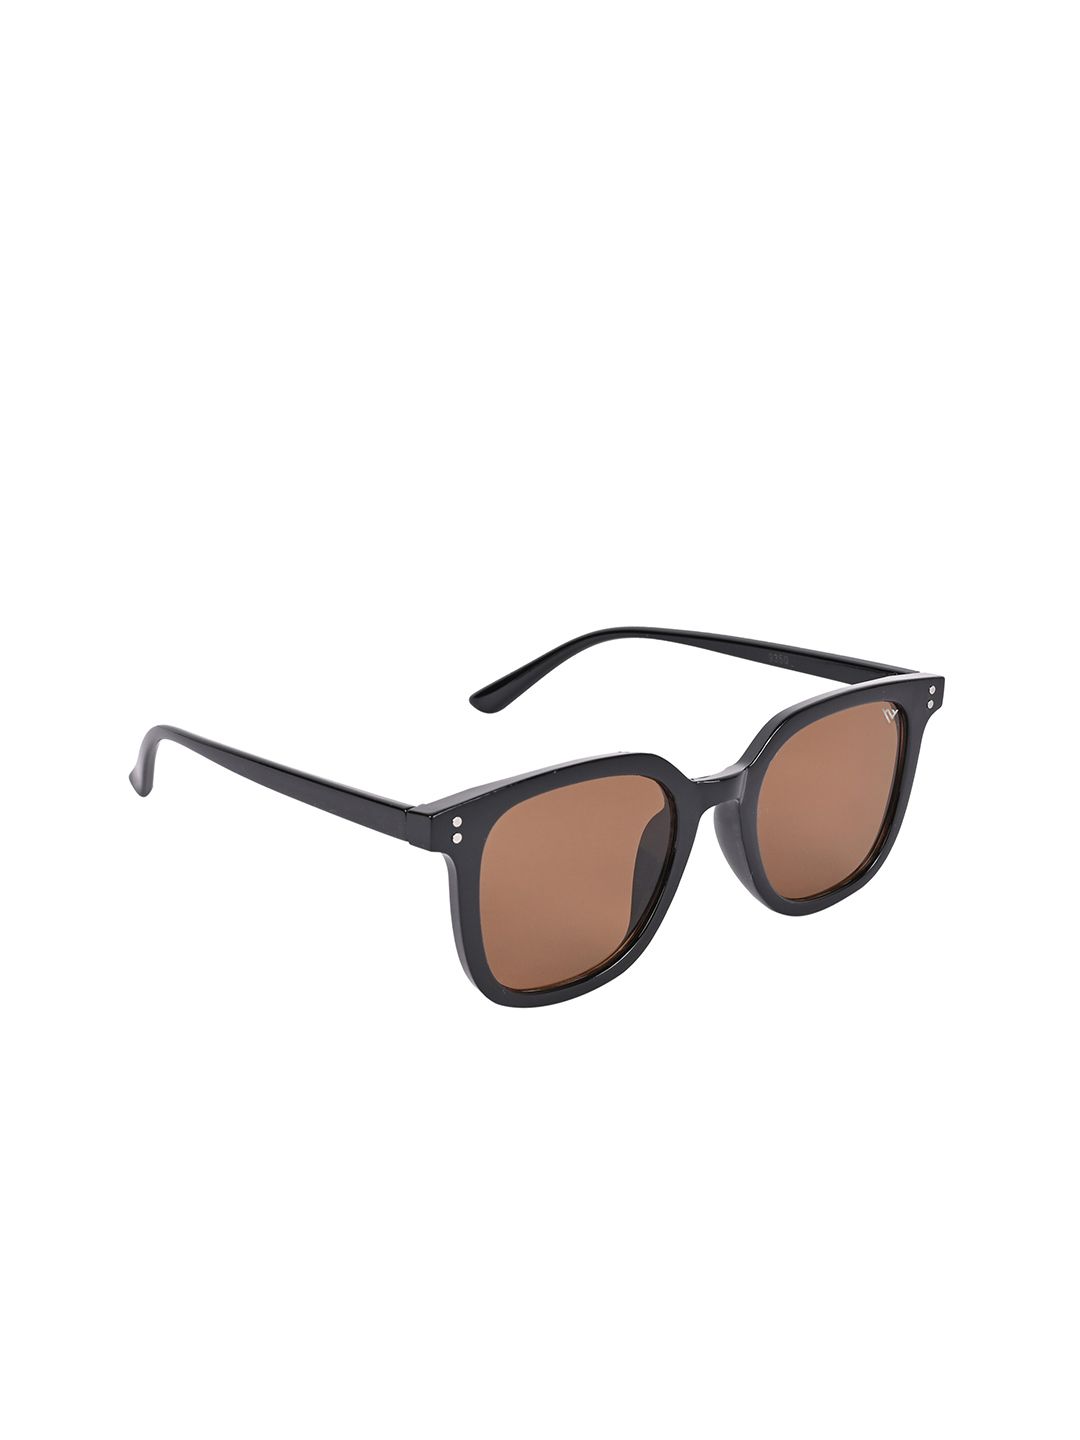 Voyage Unisex Brown Lens & Black Wayfarer Sunglasses with UV Protected Lens Price in India